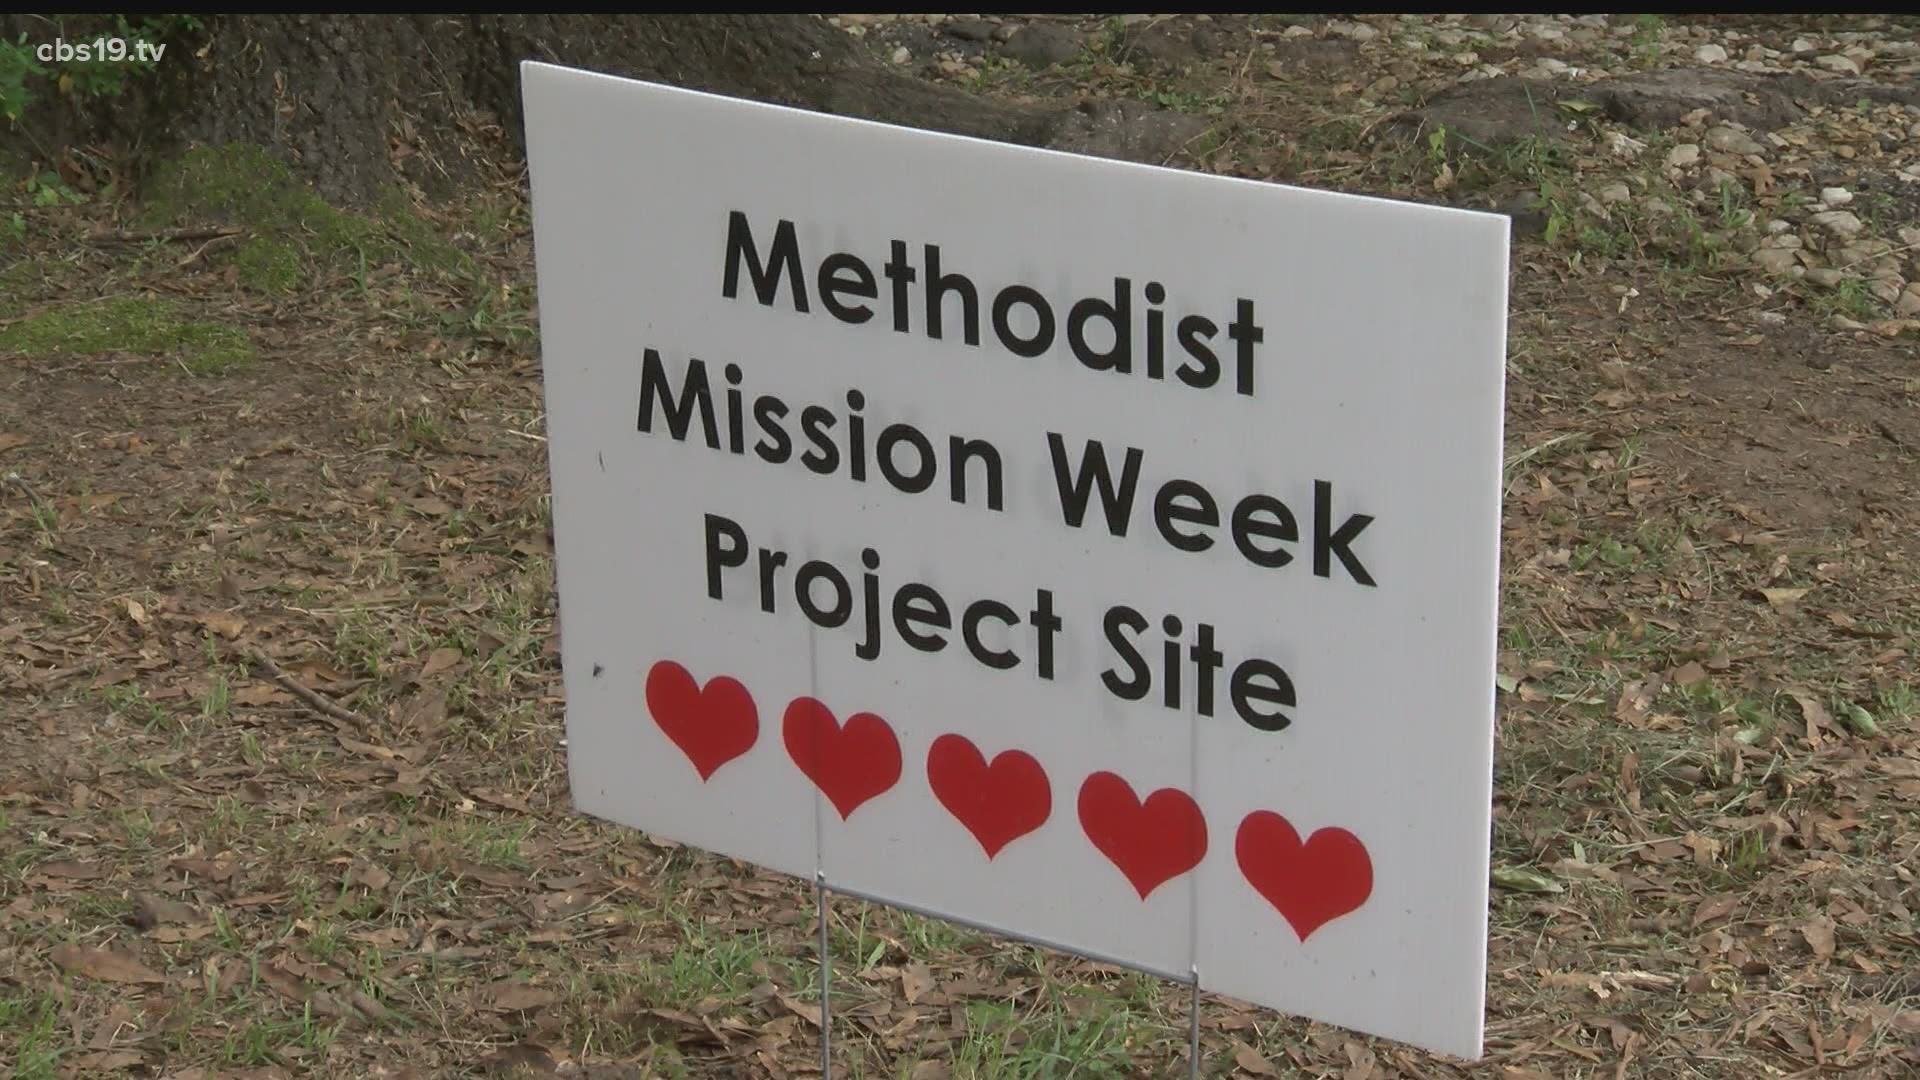 For more than 30 years Marvin, Pollard and Saint Paul’s Methodist Churches have been putting on mission weeks and the volunteers say they are excited to be back.